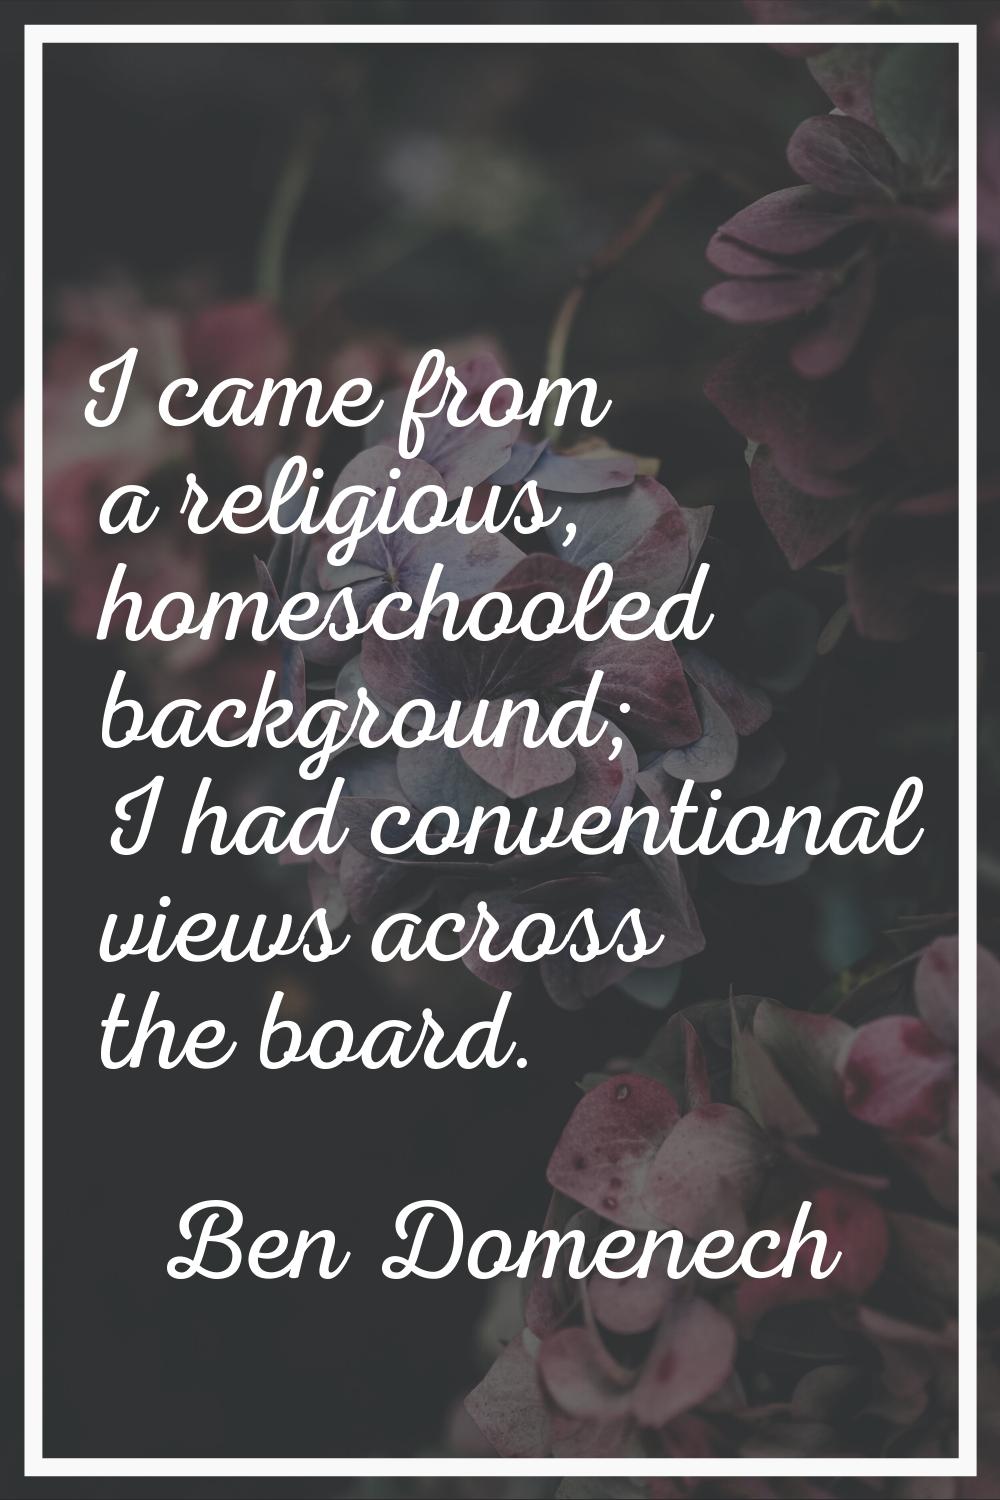 I came from a religious, homeschooled background; I had conventional views across the board.